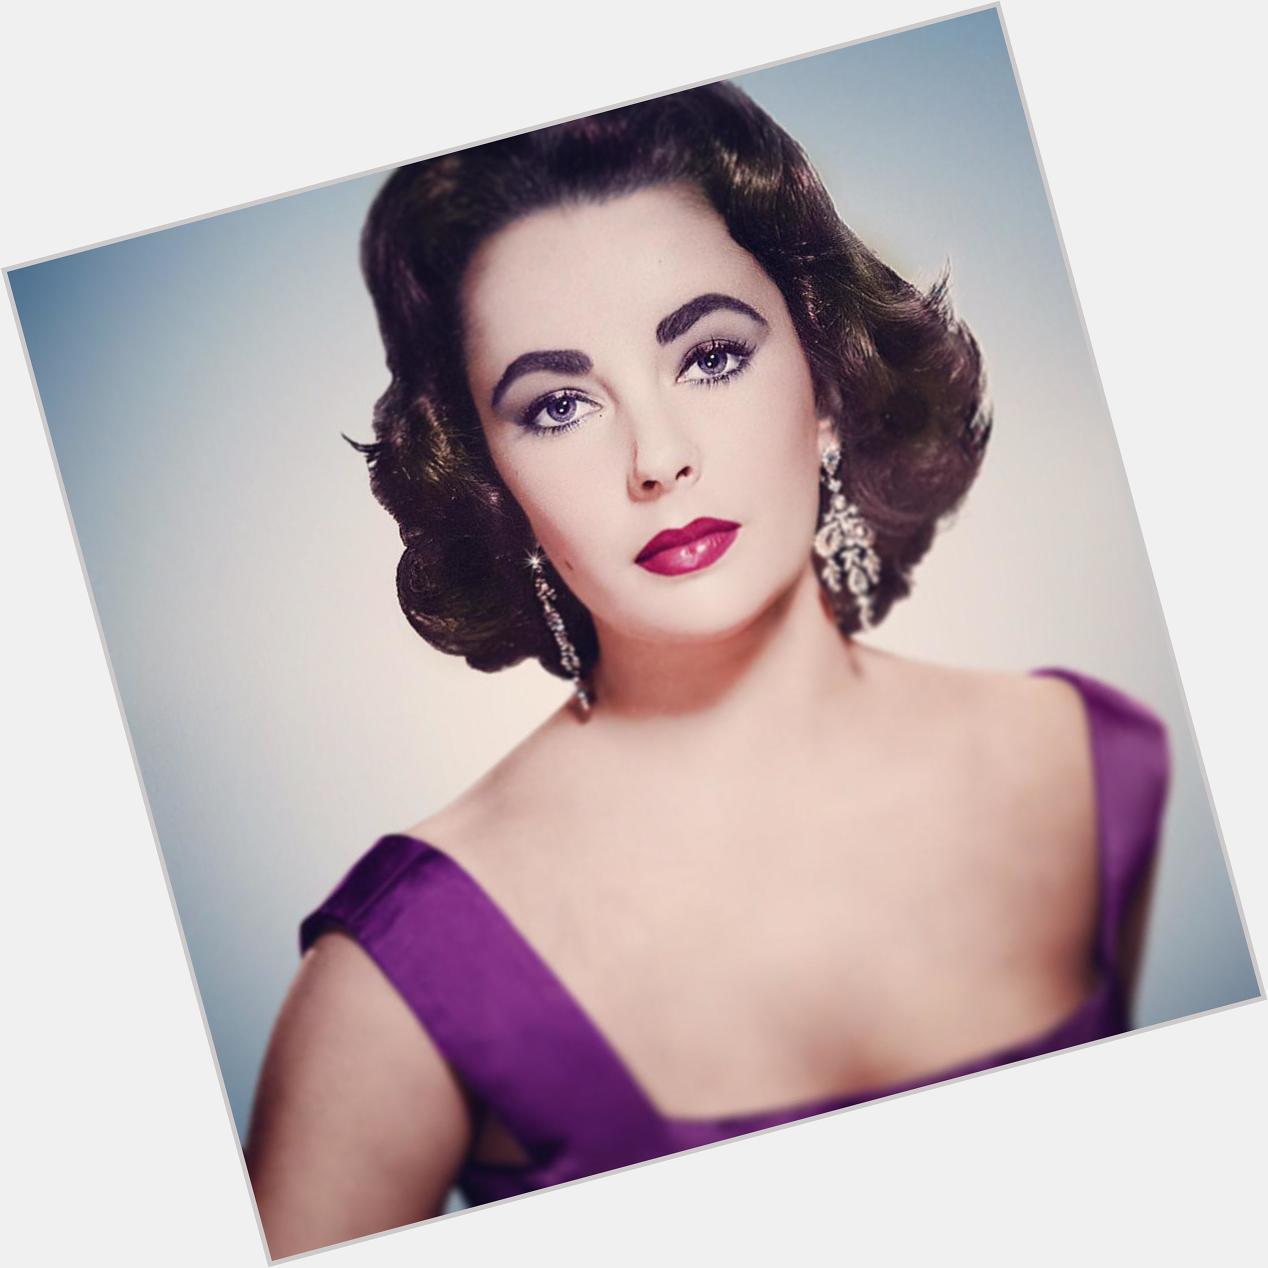 Happy birthday Elizabeth Taylor. I finally forgive you for not leaving me any of your jewellery in your will. 